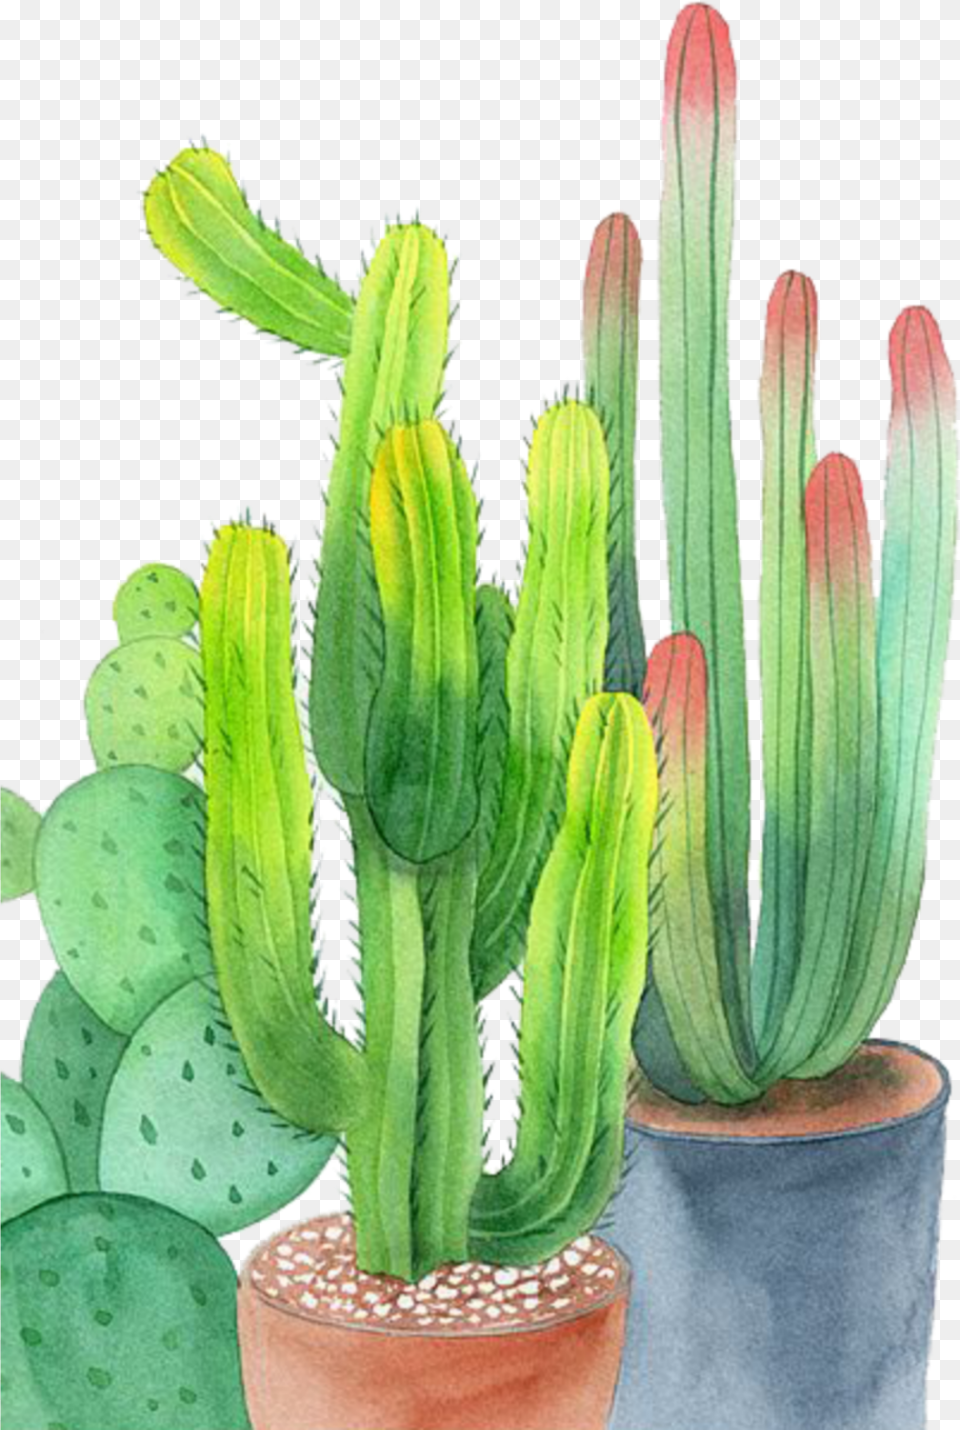 Ftestickers Watercolor Cactus Cacti Potted Watercolor Cactus Cactus Free Transparent Png